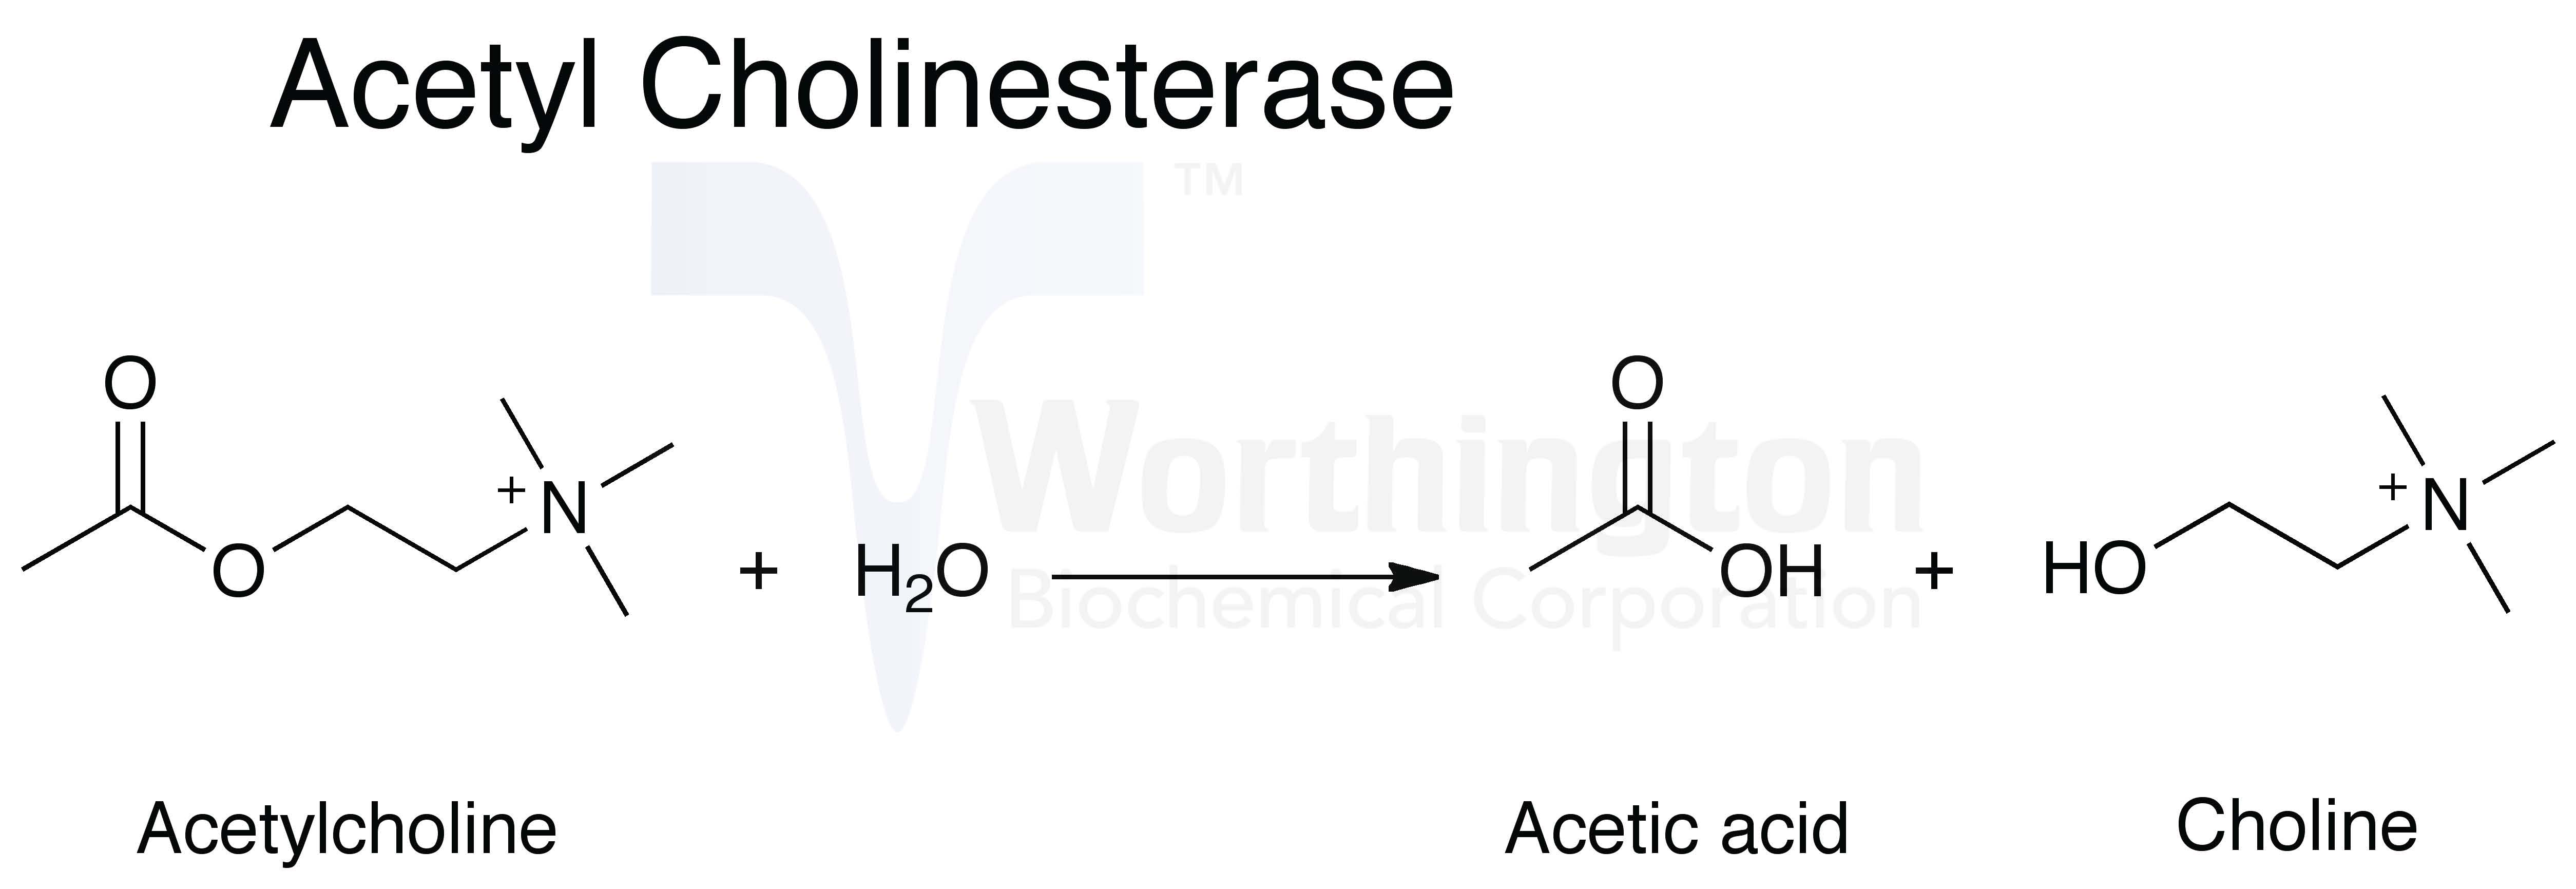 acetylcholinesterase chemical structure